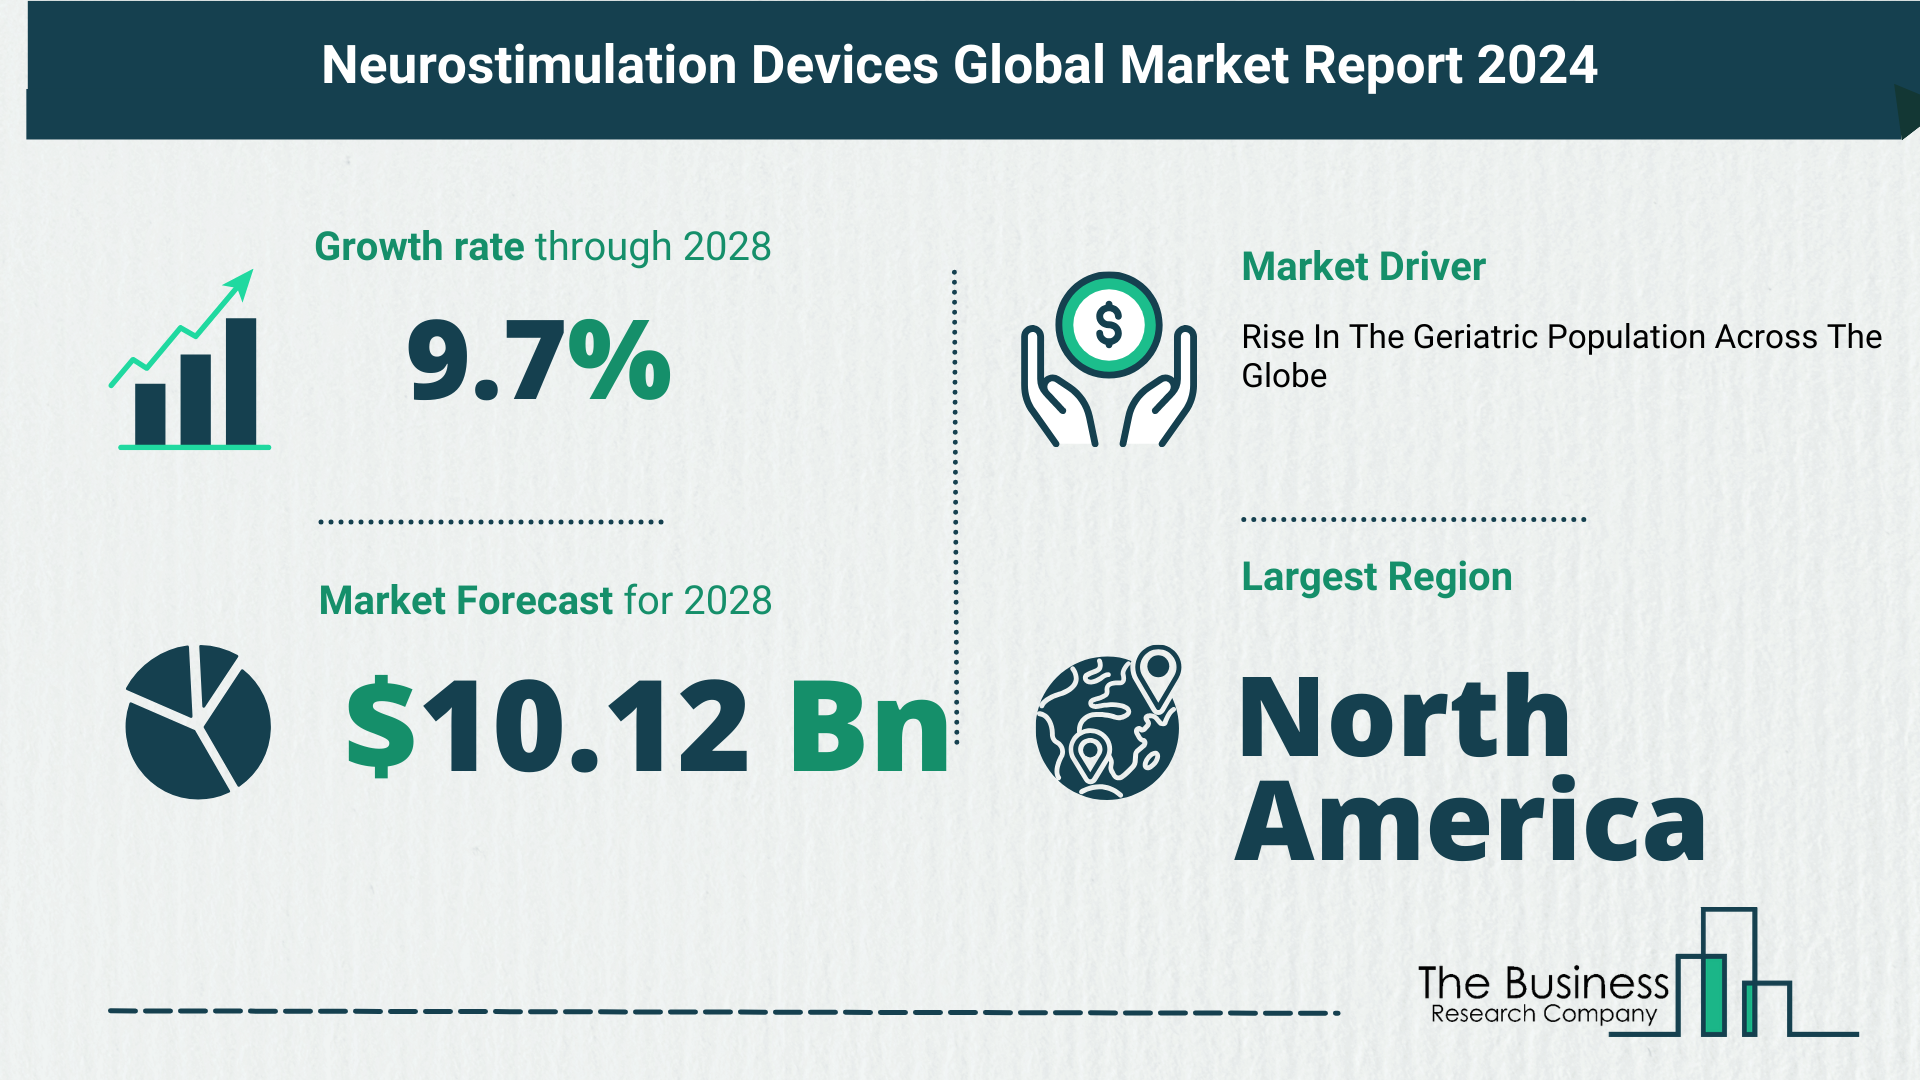 5 Takeaways From The Neurostimulation Devices Market Overview 2024